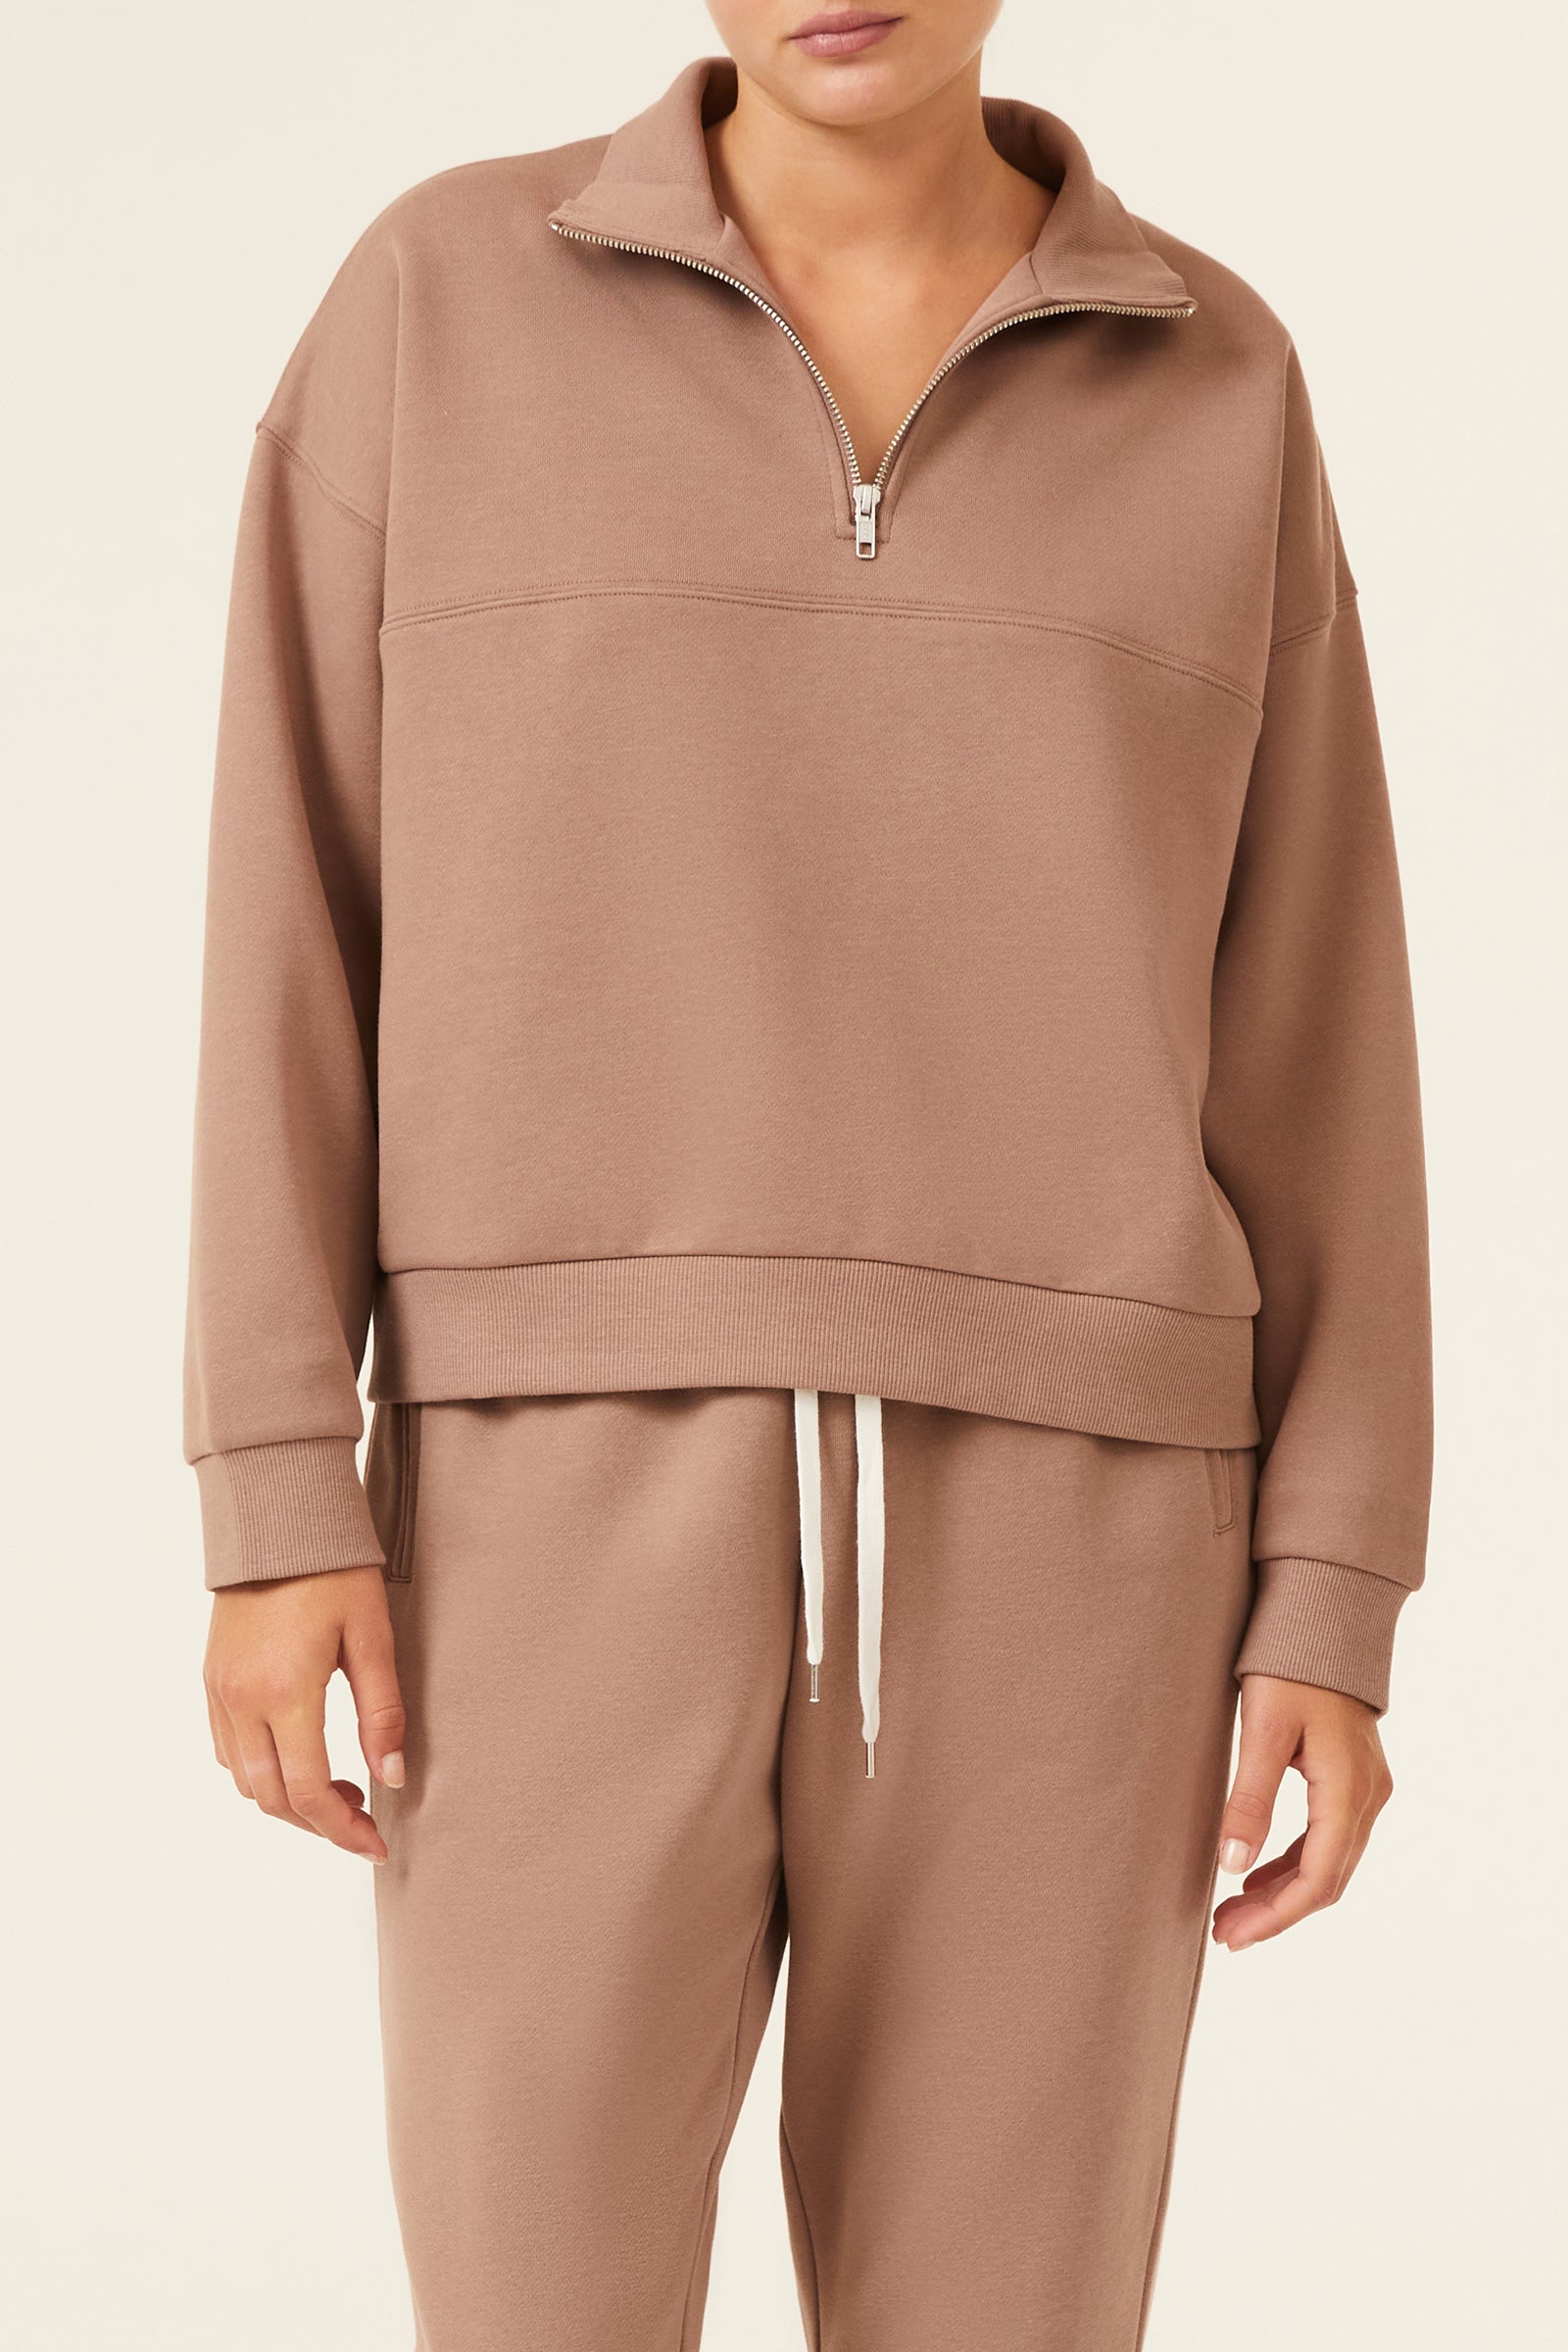 Nude Lucy Carter Zip Front Sweat in a Brown Carob Colour